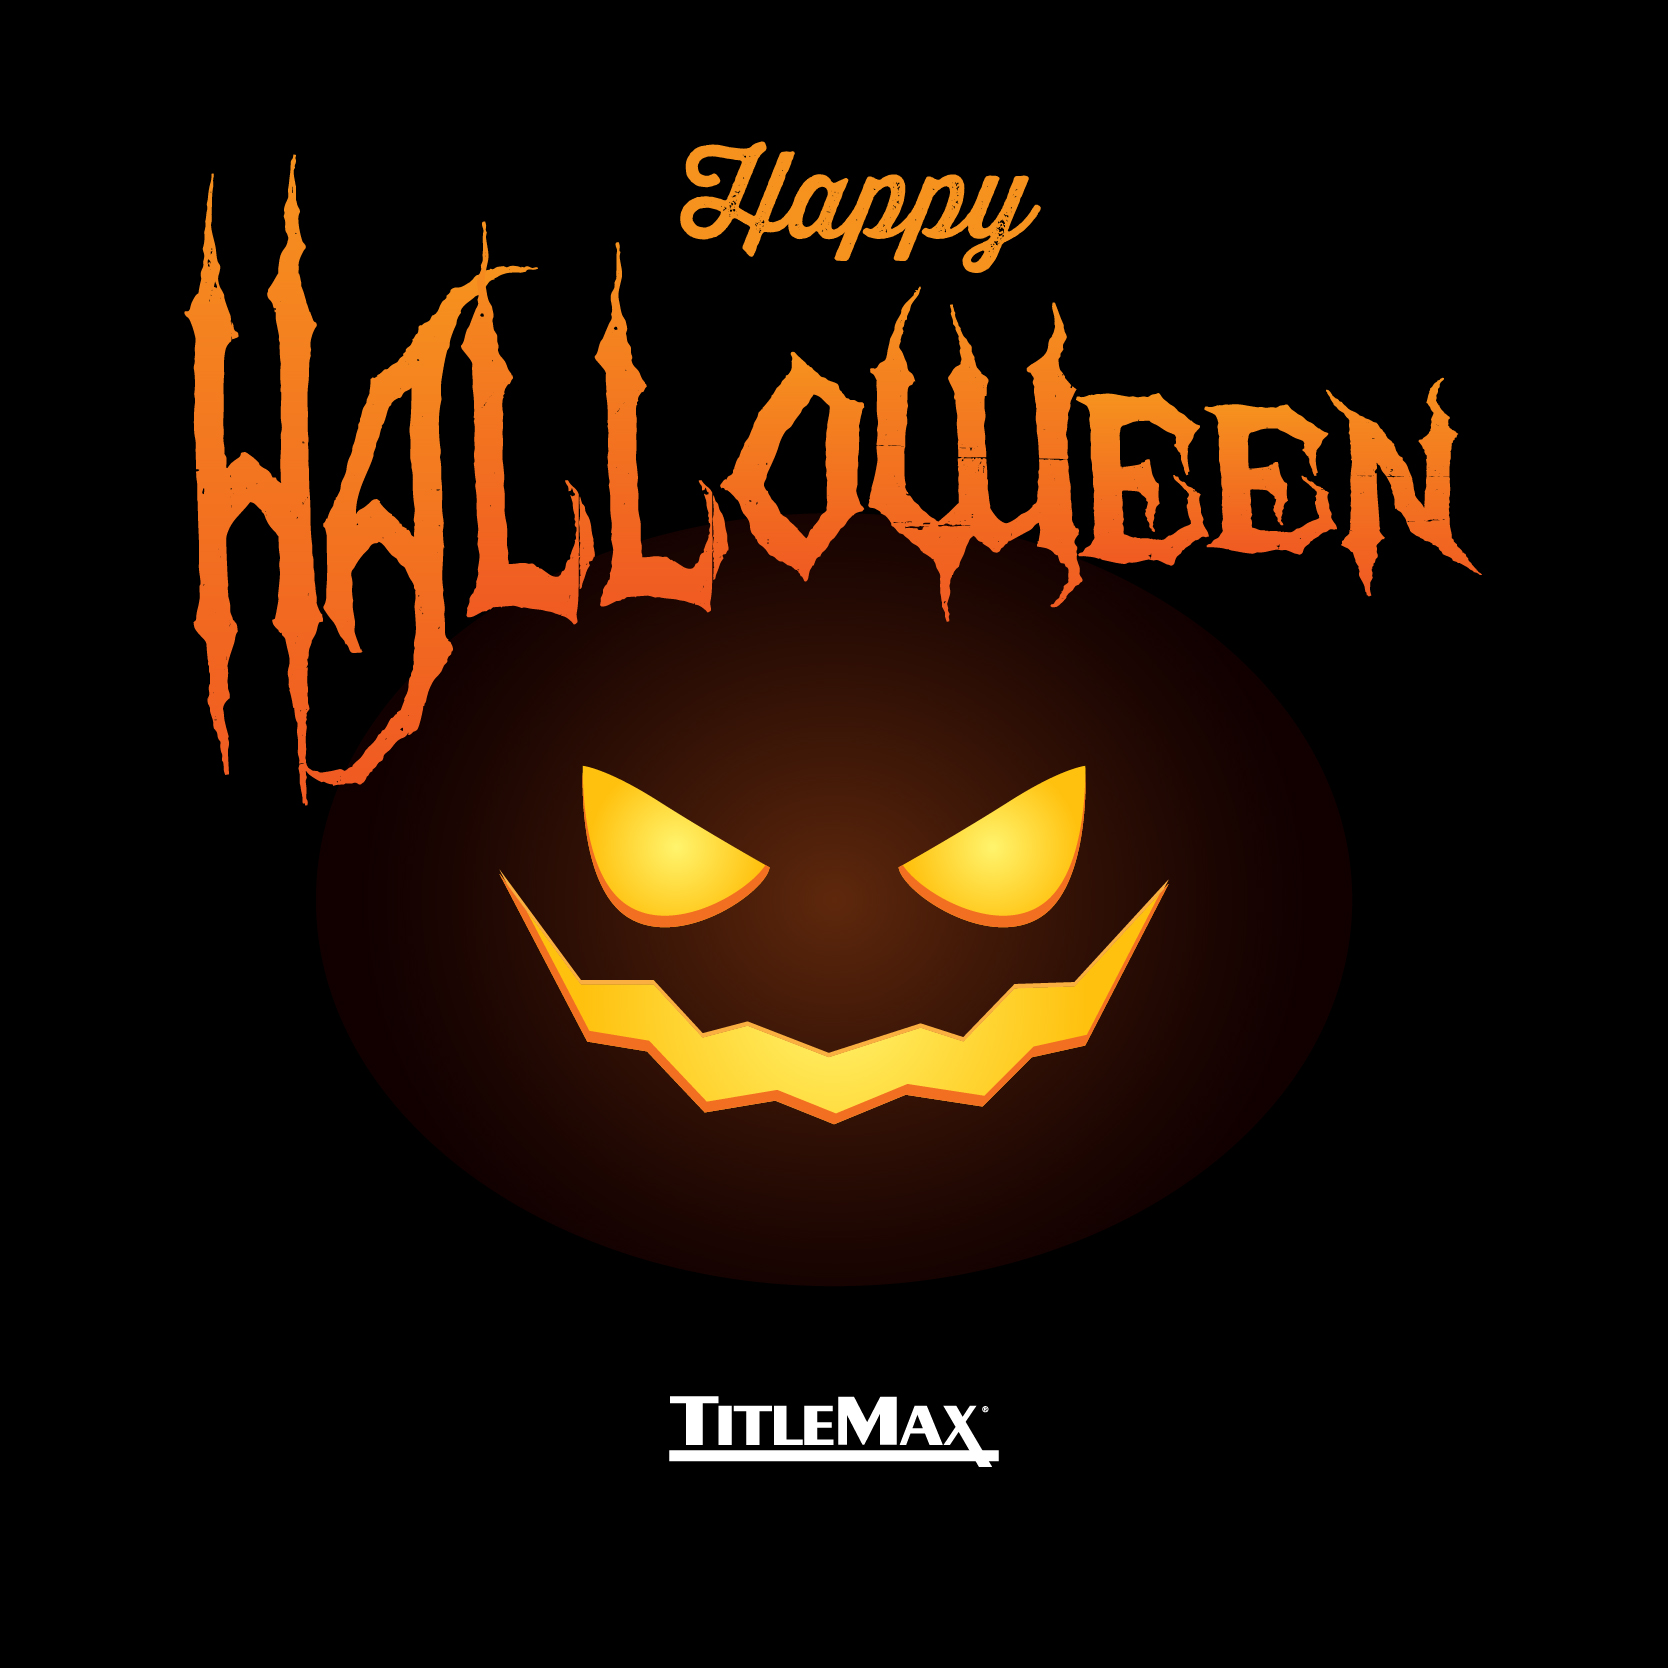 Happy Halloween Pictures, Photos, and Images for Facebook 